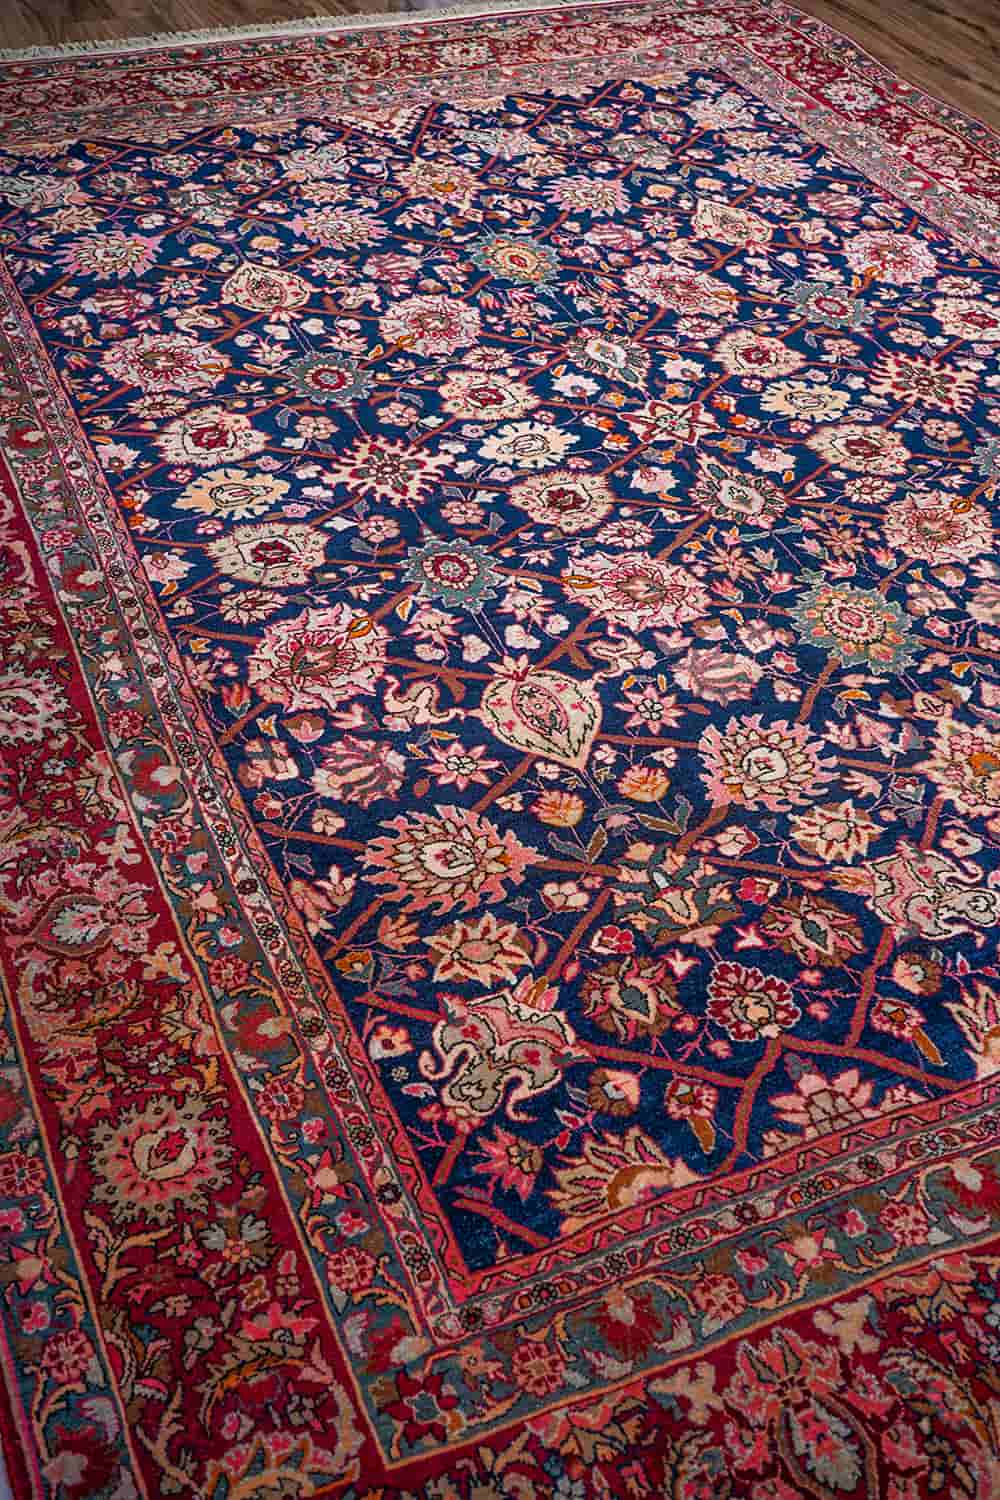 Dark Blue Rustic Red and handcrafted Antique Persian Carpets made from Wool by Carpet Cellar